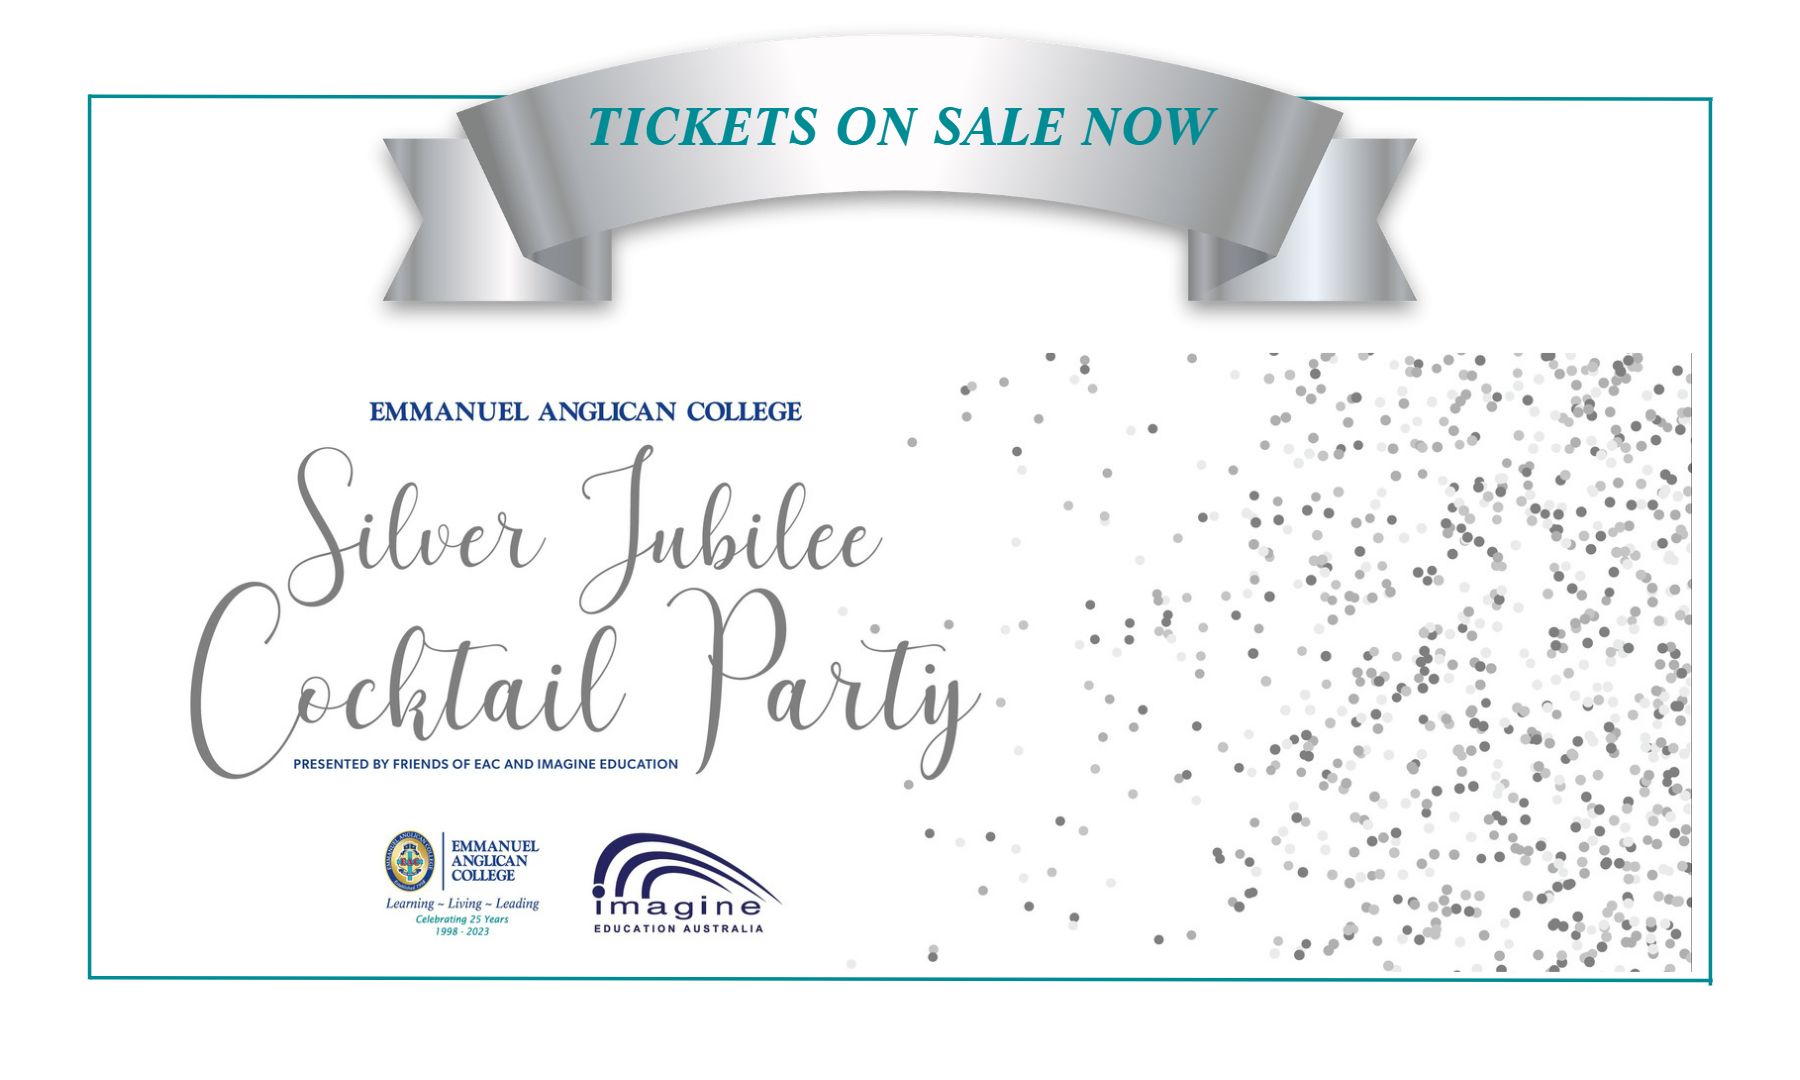 Friends Silver Jubilee Cocktail Party Tickets On Sale Now